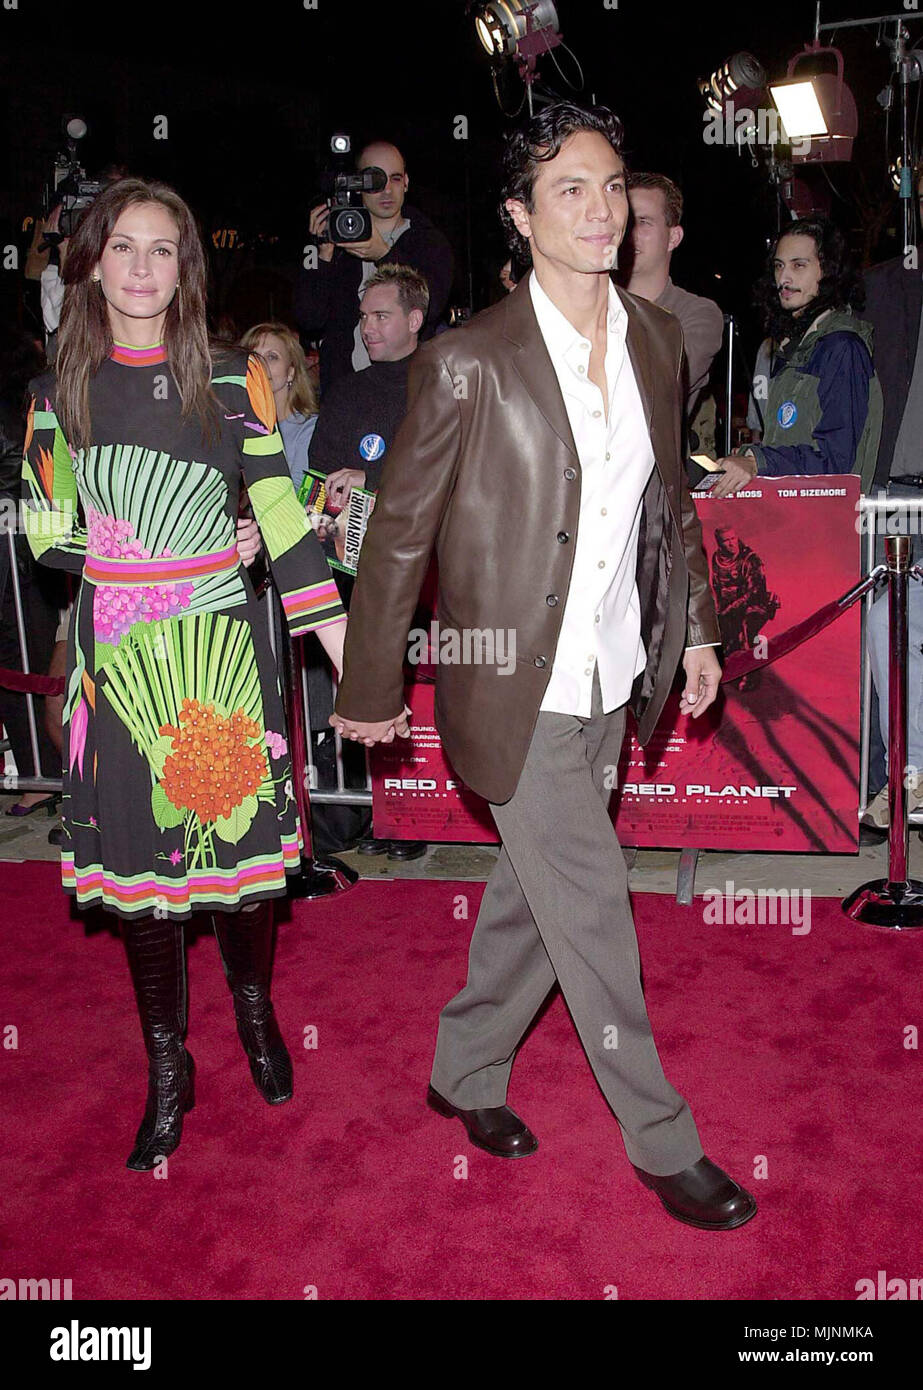 06 Nov 2000, Los Angeles, California, USA --- Original caption: Red Planet premiere was held at the Westwood Village Theatre in Los Angeles. --- ' Tsuni / USA 'Julia Roberts and Benjamin Bratt     Julia Roberts and Benjamin Bratt     Celebrities fashion / Full length from the Red Carpet-1994-2000, one person, Vertical, Best of, Hollywood Life, one person, Vertical, Best of, Hollywood Life, Event in Hollywood Life - California,  Red Carpet Event, Vertical, USA, Film Industry, Celebrities,  Photography, Bestof, Arts Culture and Entertainment, , , Topix Stock Photo